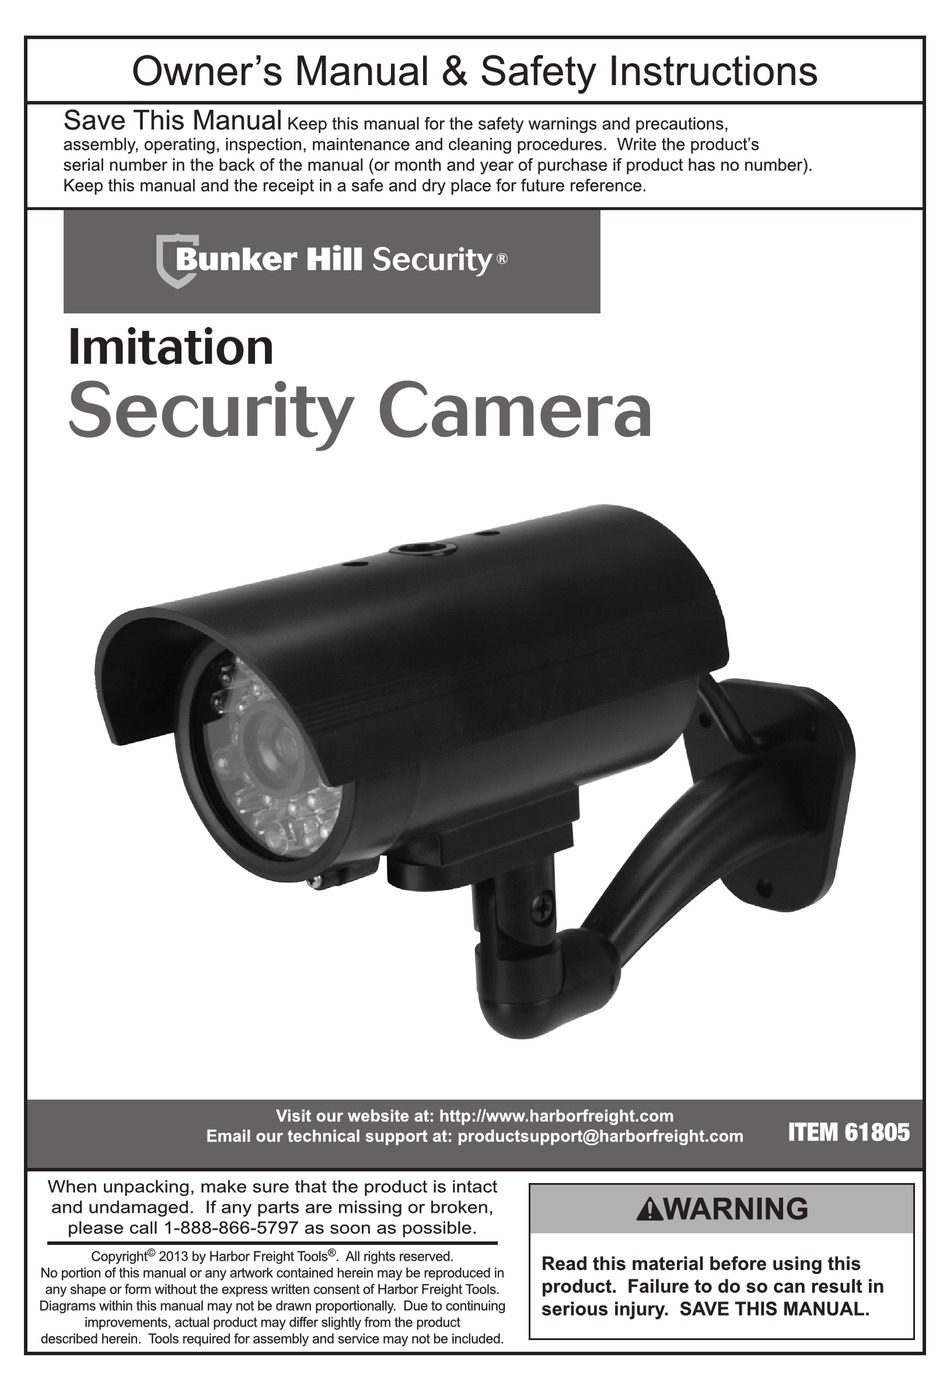 Bunker hill security dvr firmware update 61229 harbor freight 62463